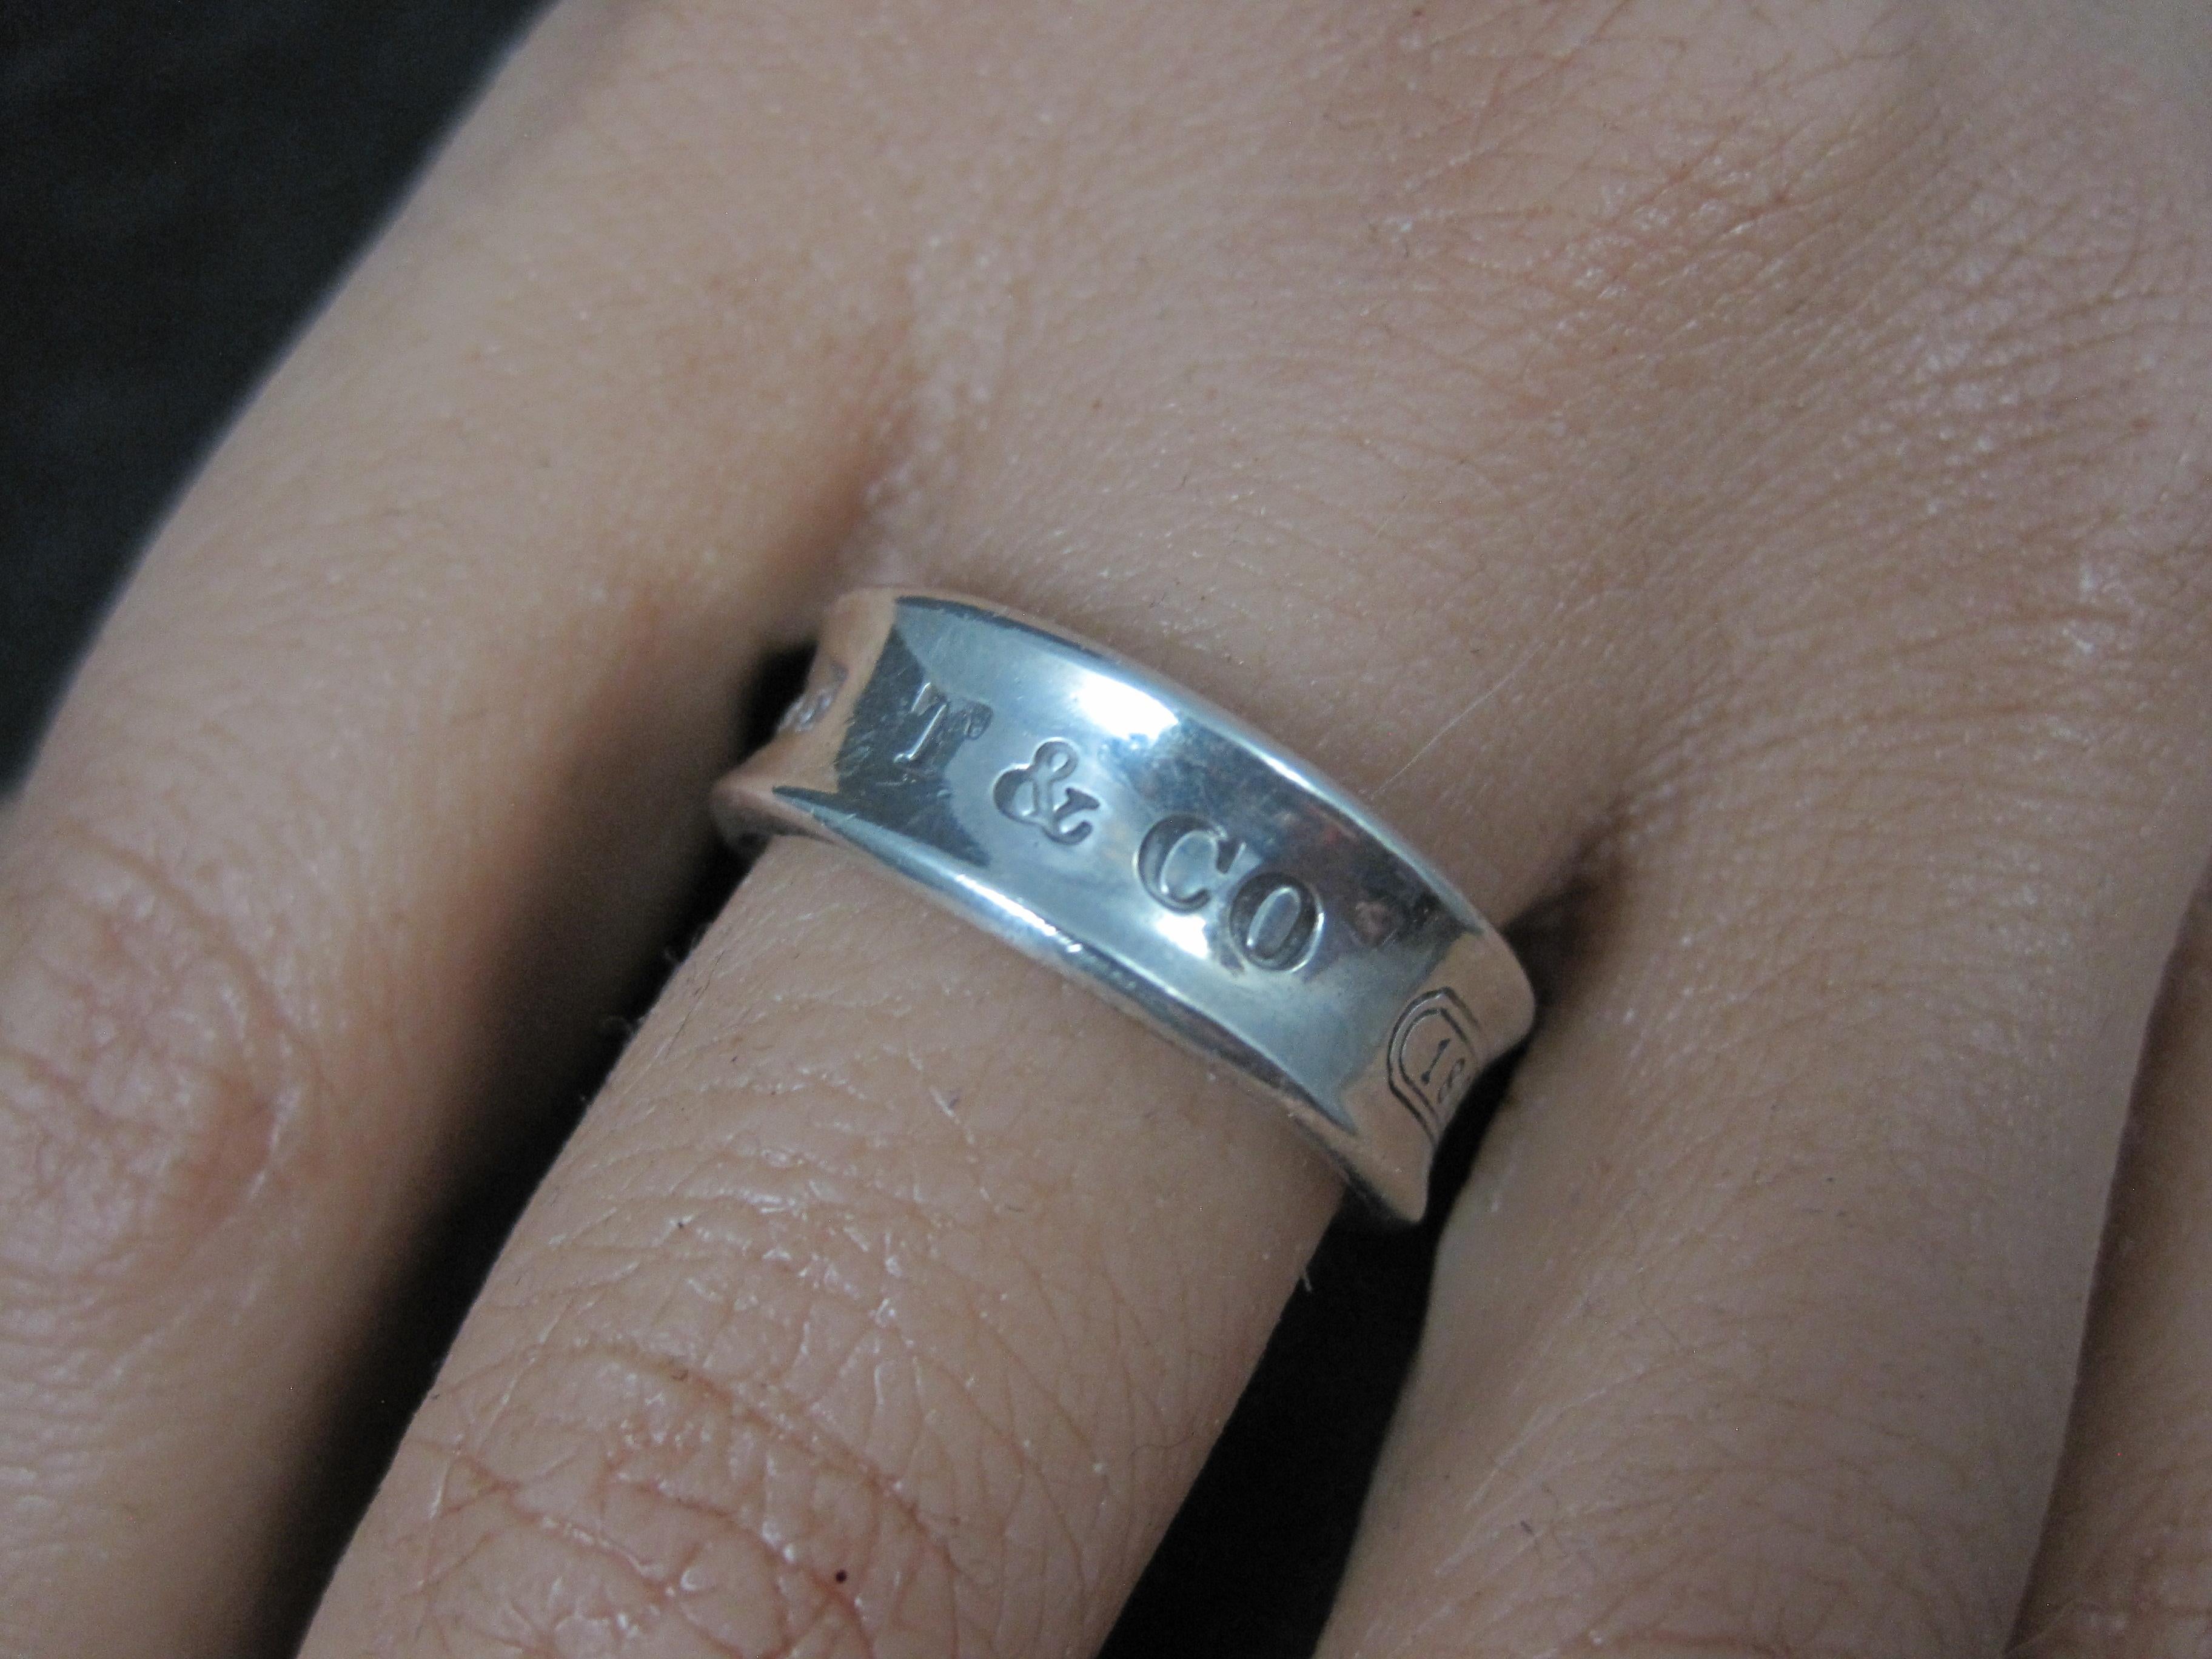 1997 Tiffany & Co 1837 Band Ring Sterling Silver Size 6.5 en vente 7